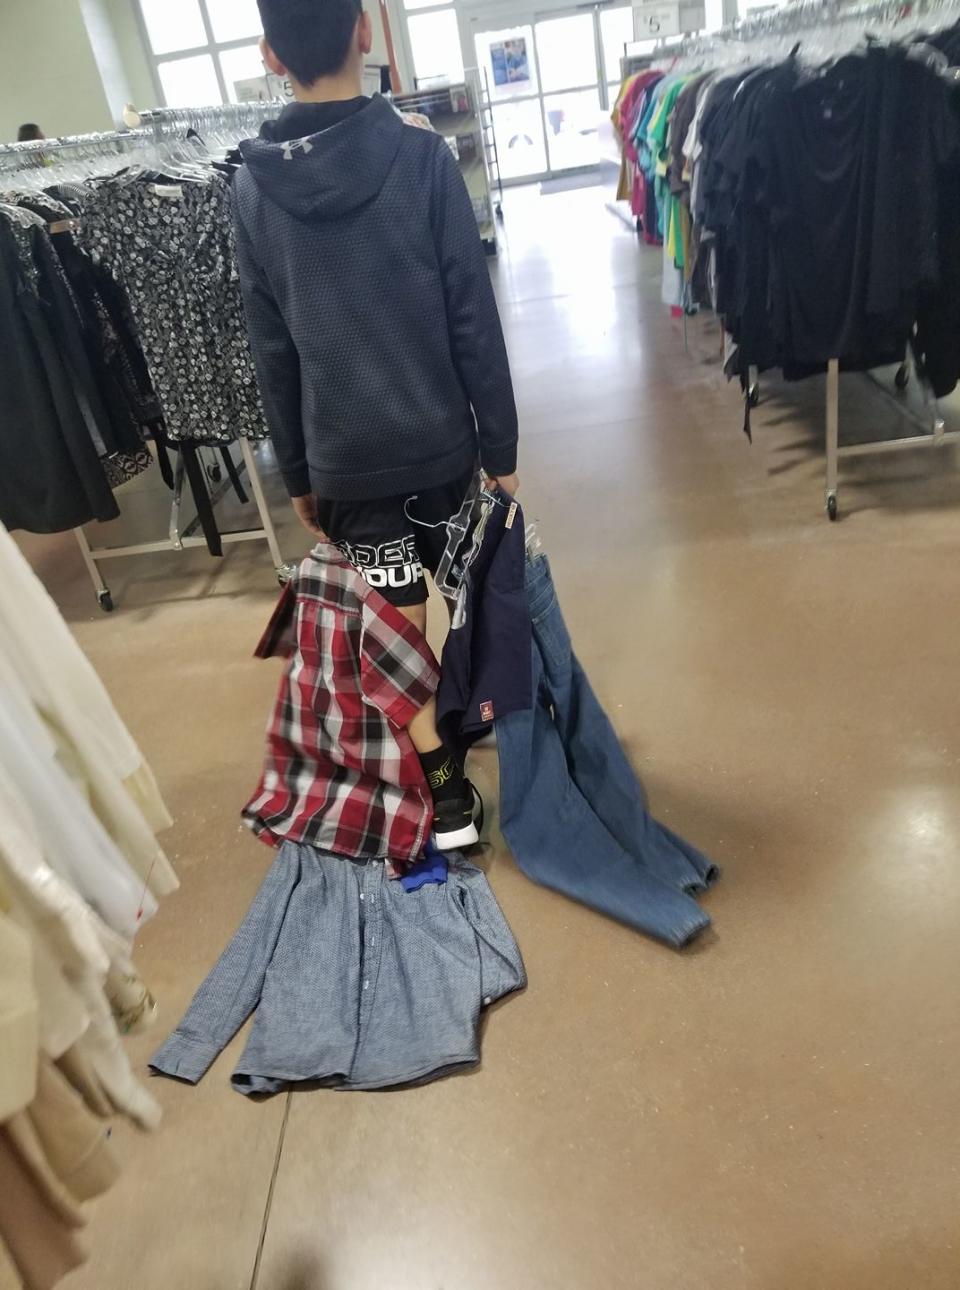 A teen whose mom said was acting “entitled” about clothes learned a budget-conscious lesson. (Photo: Facebook/Cierra Brittany Forney)